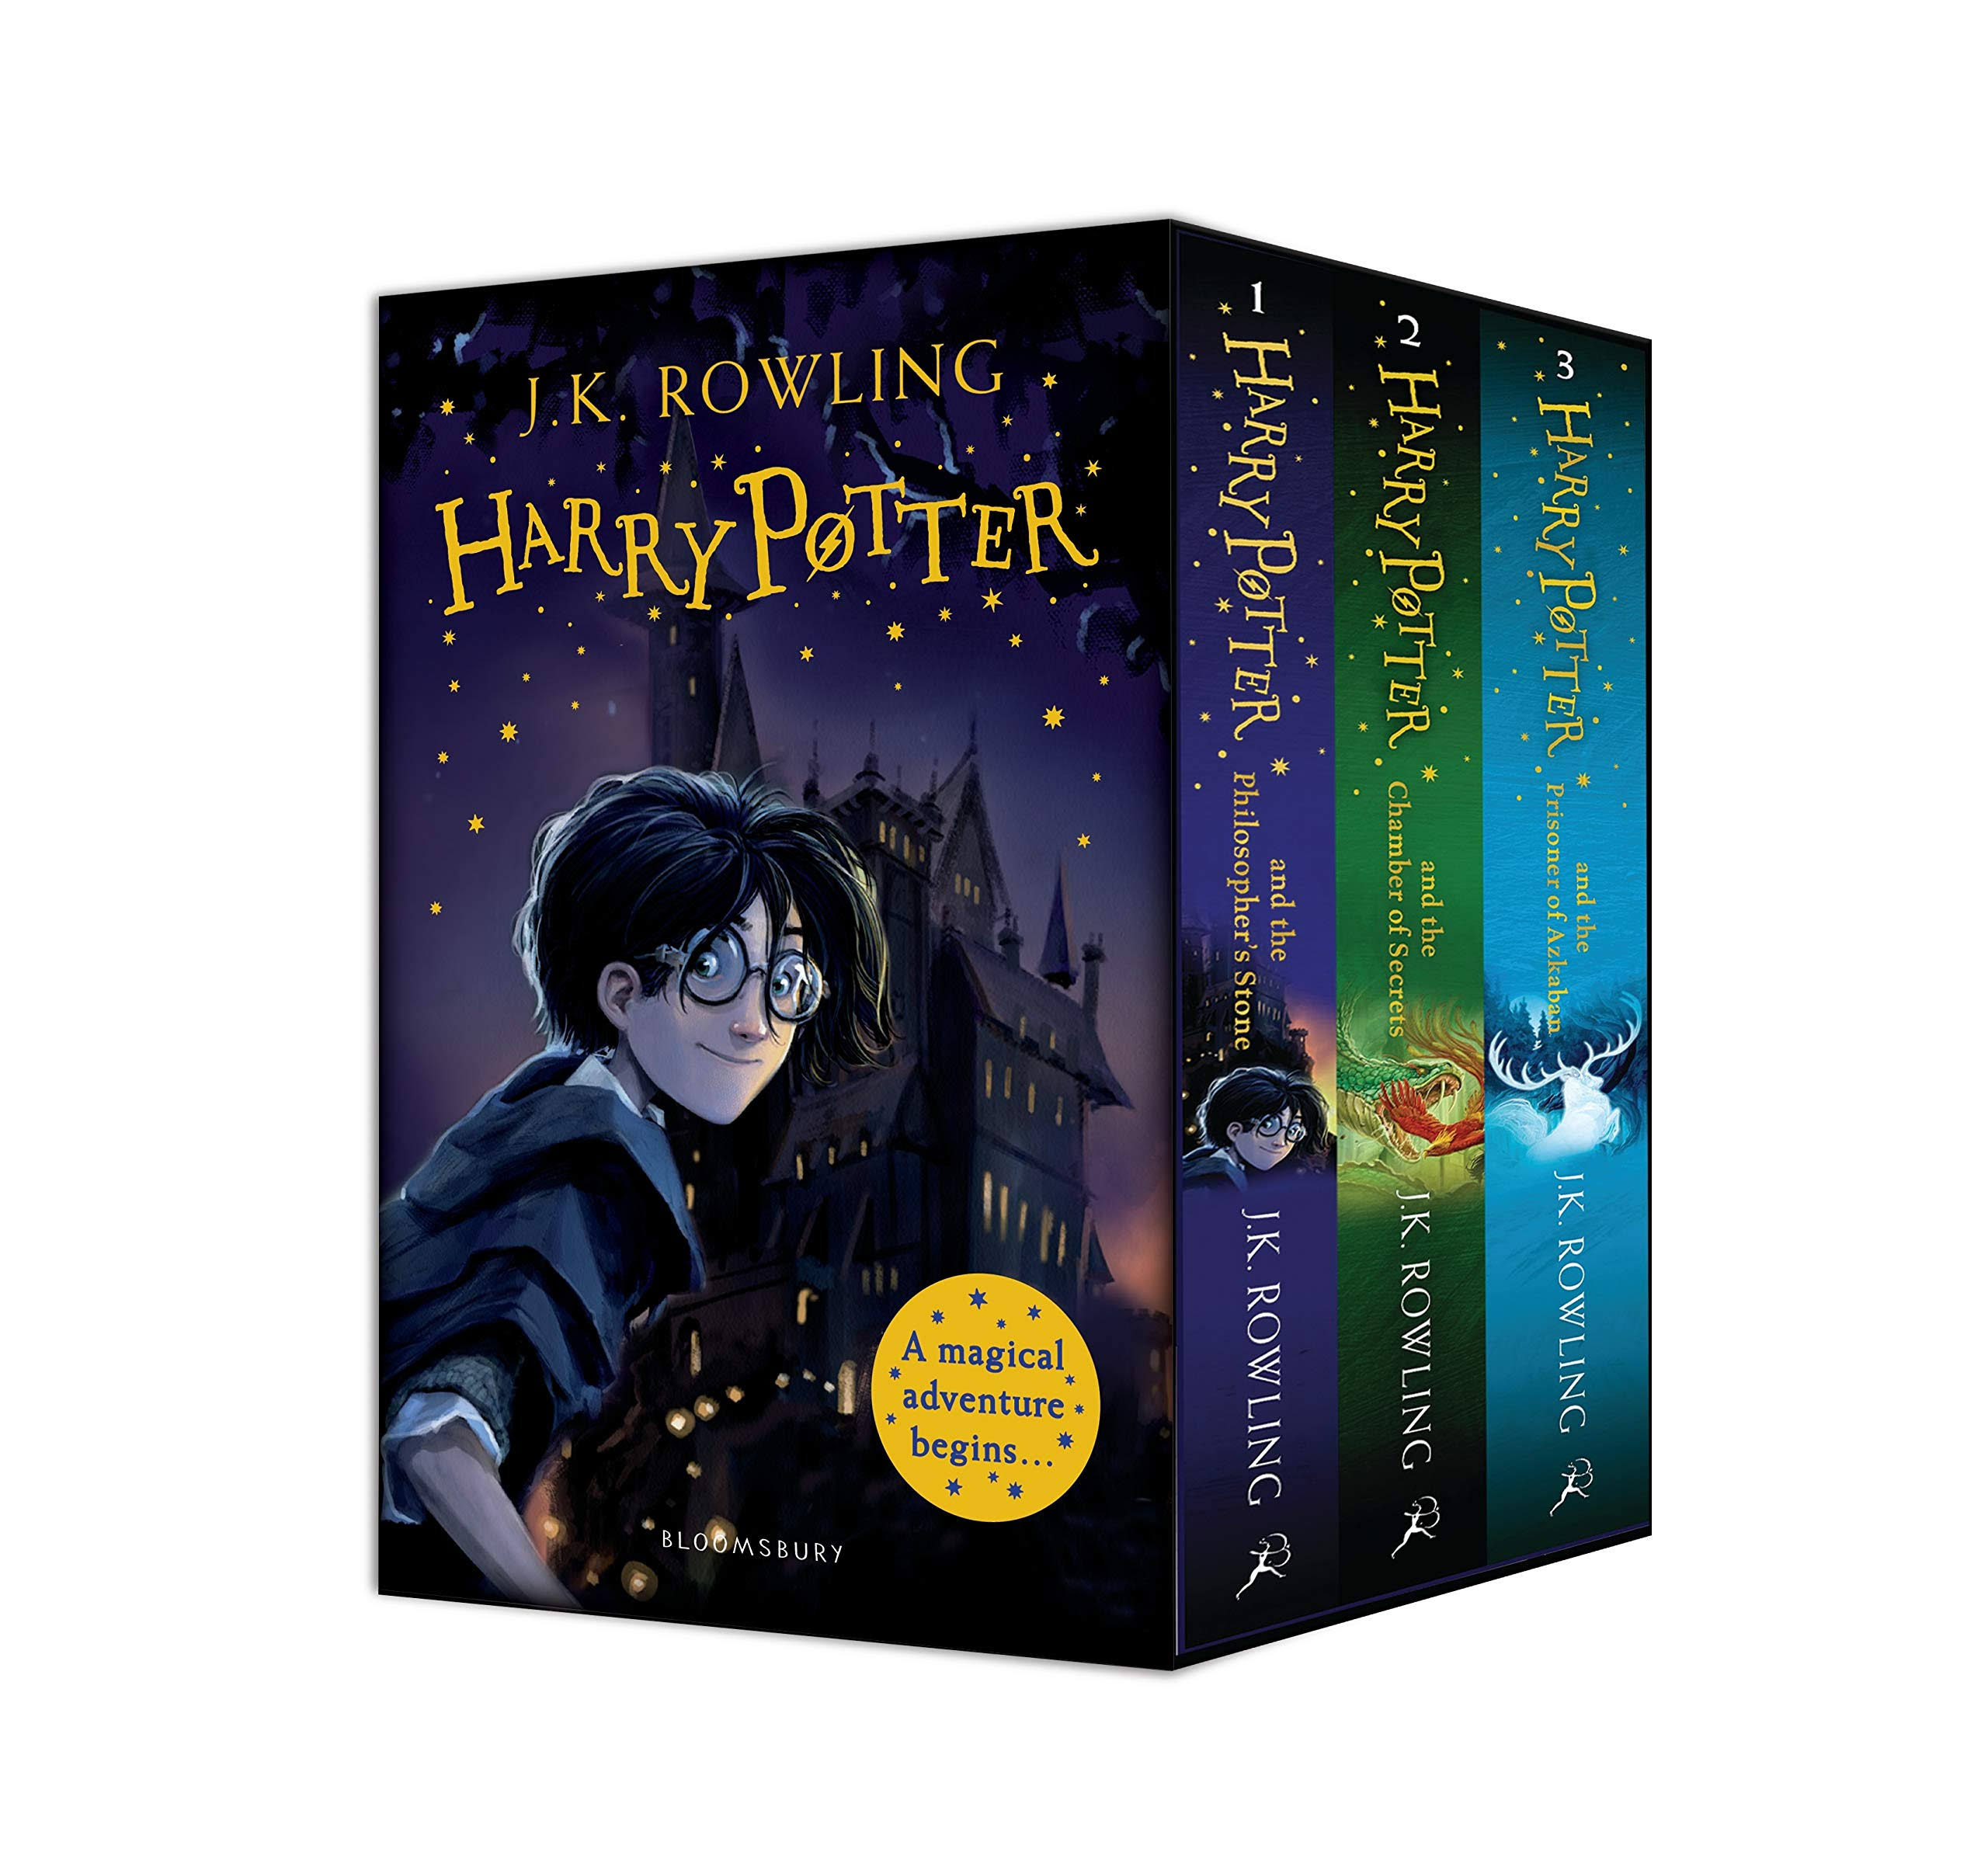 Harry Potter 1-3 Box Set: A Magical Adventure Begins By J.K. Rowling